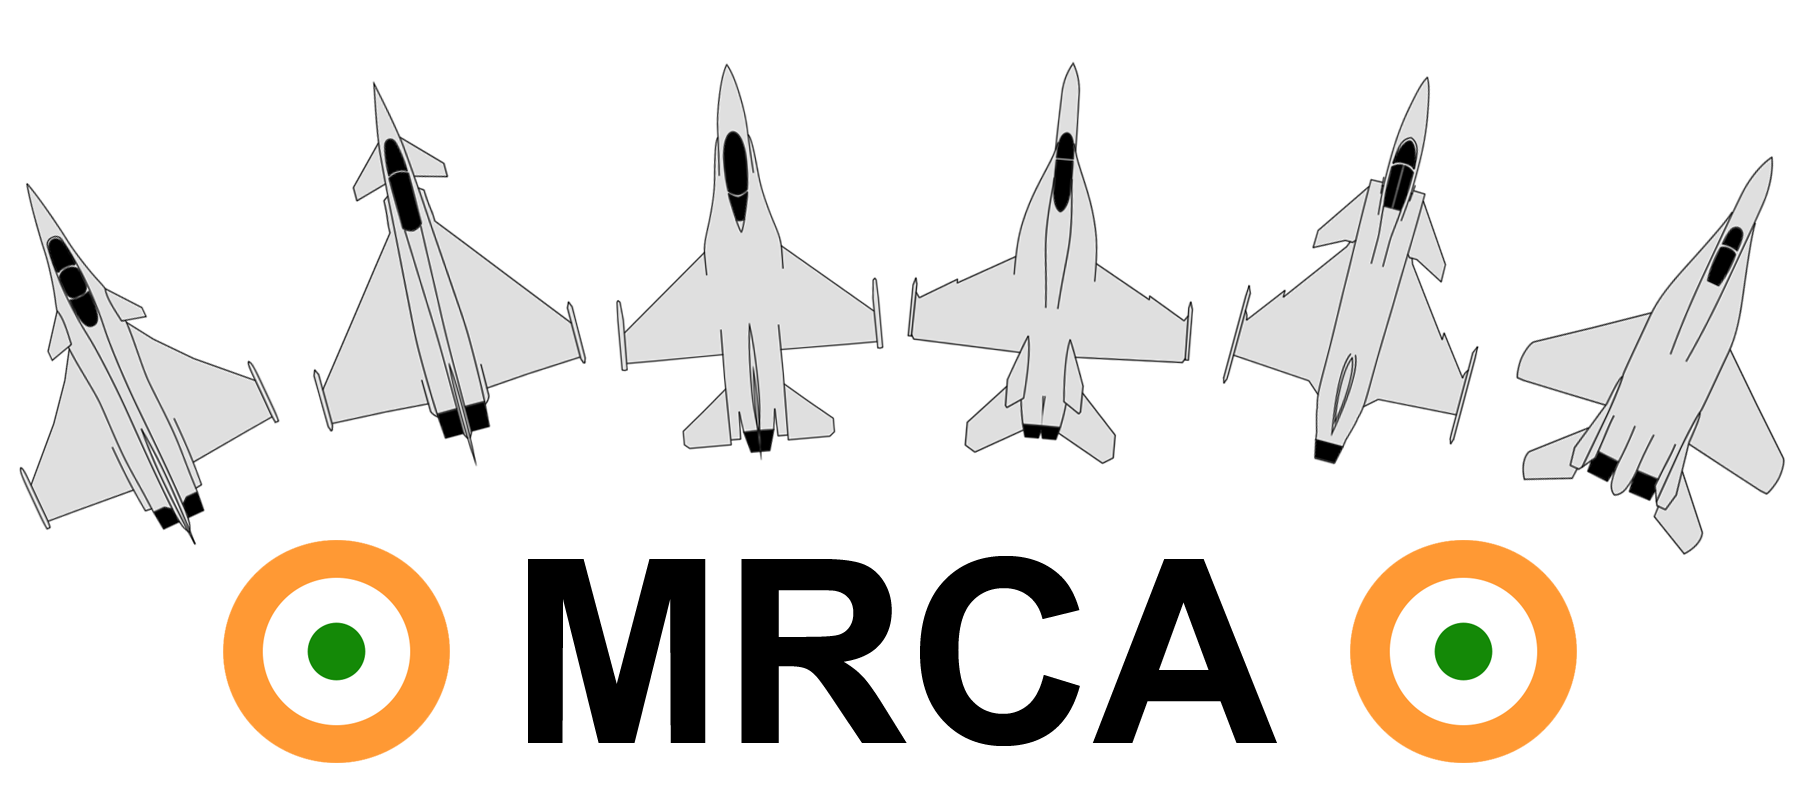 Indian MRCA competition - Wikipedia